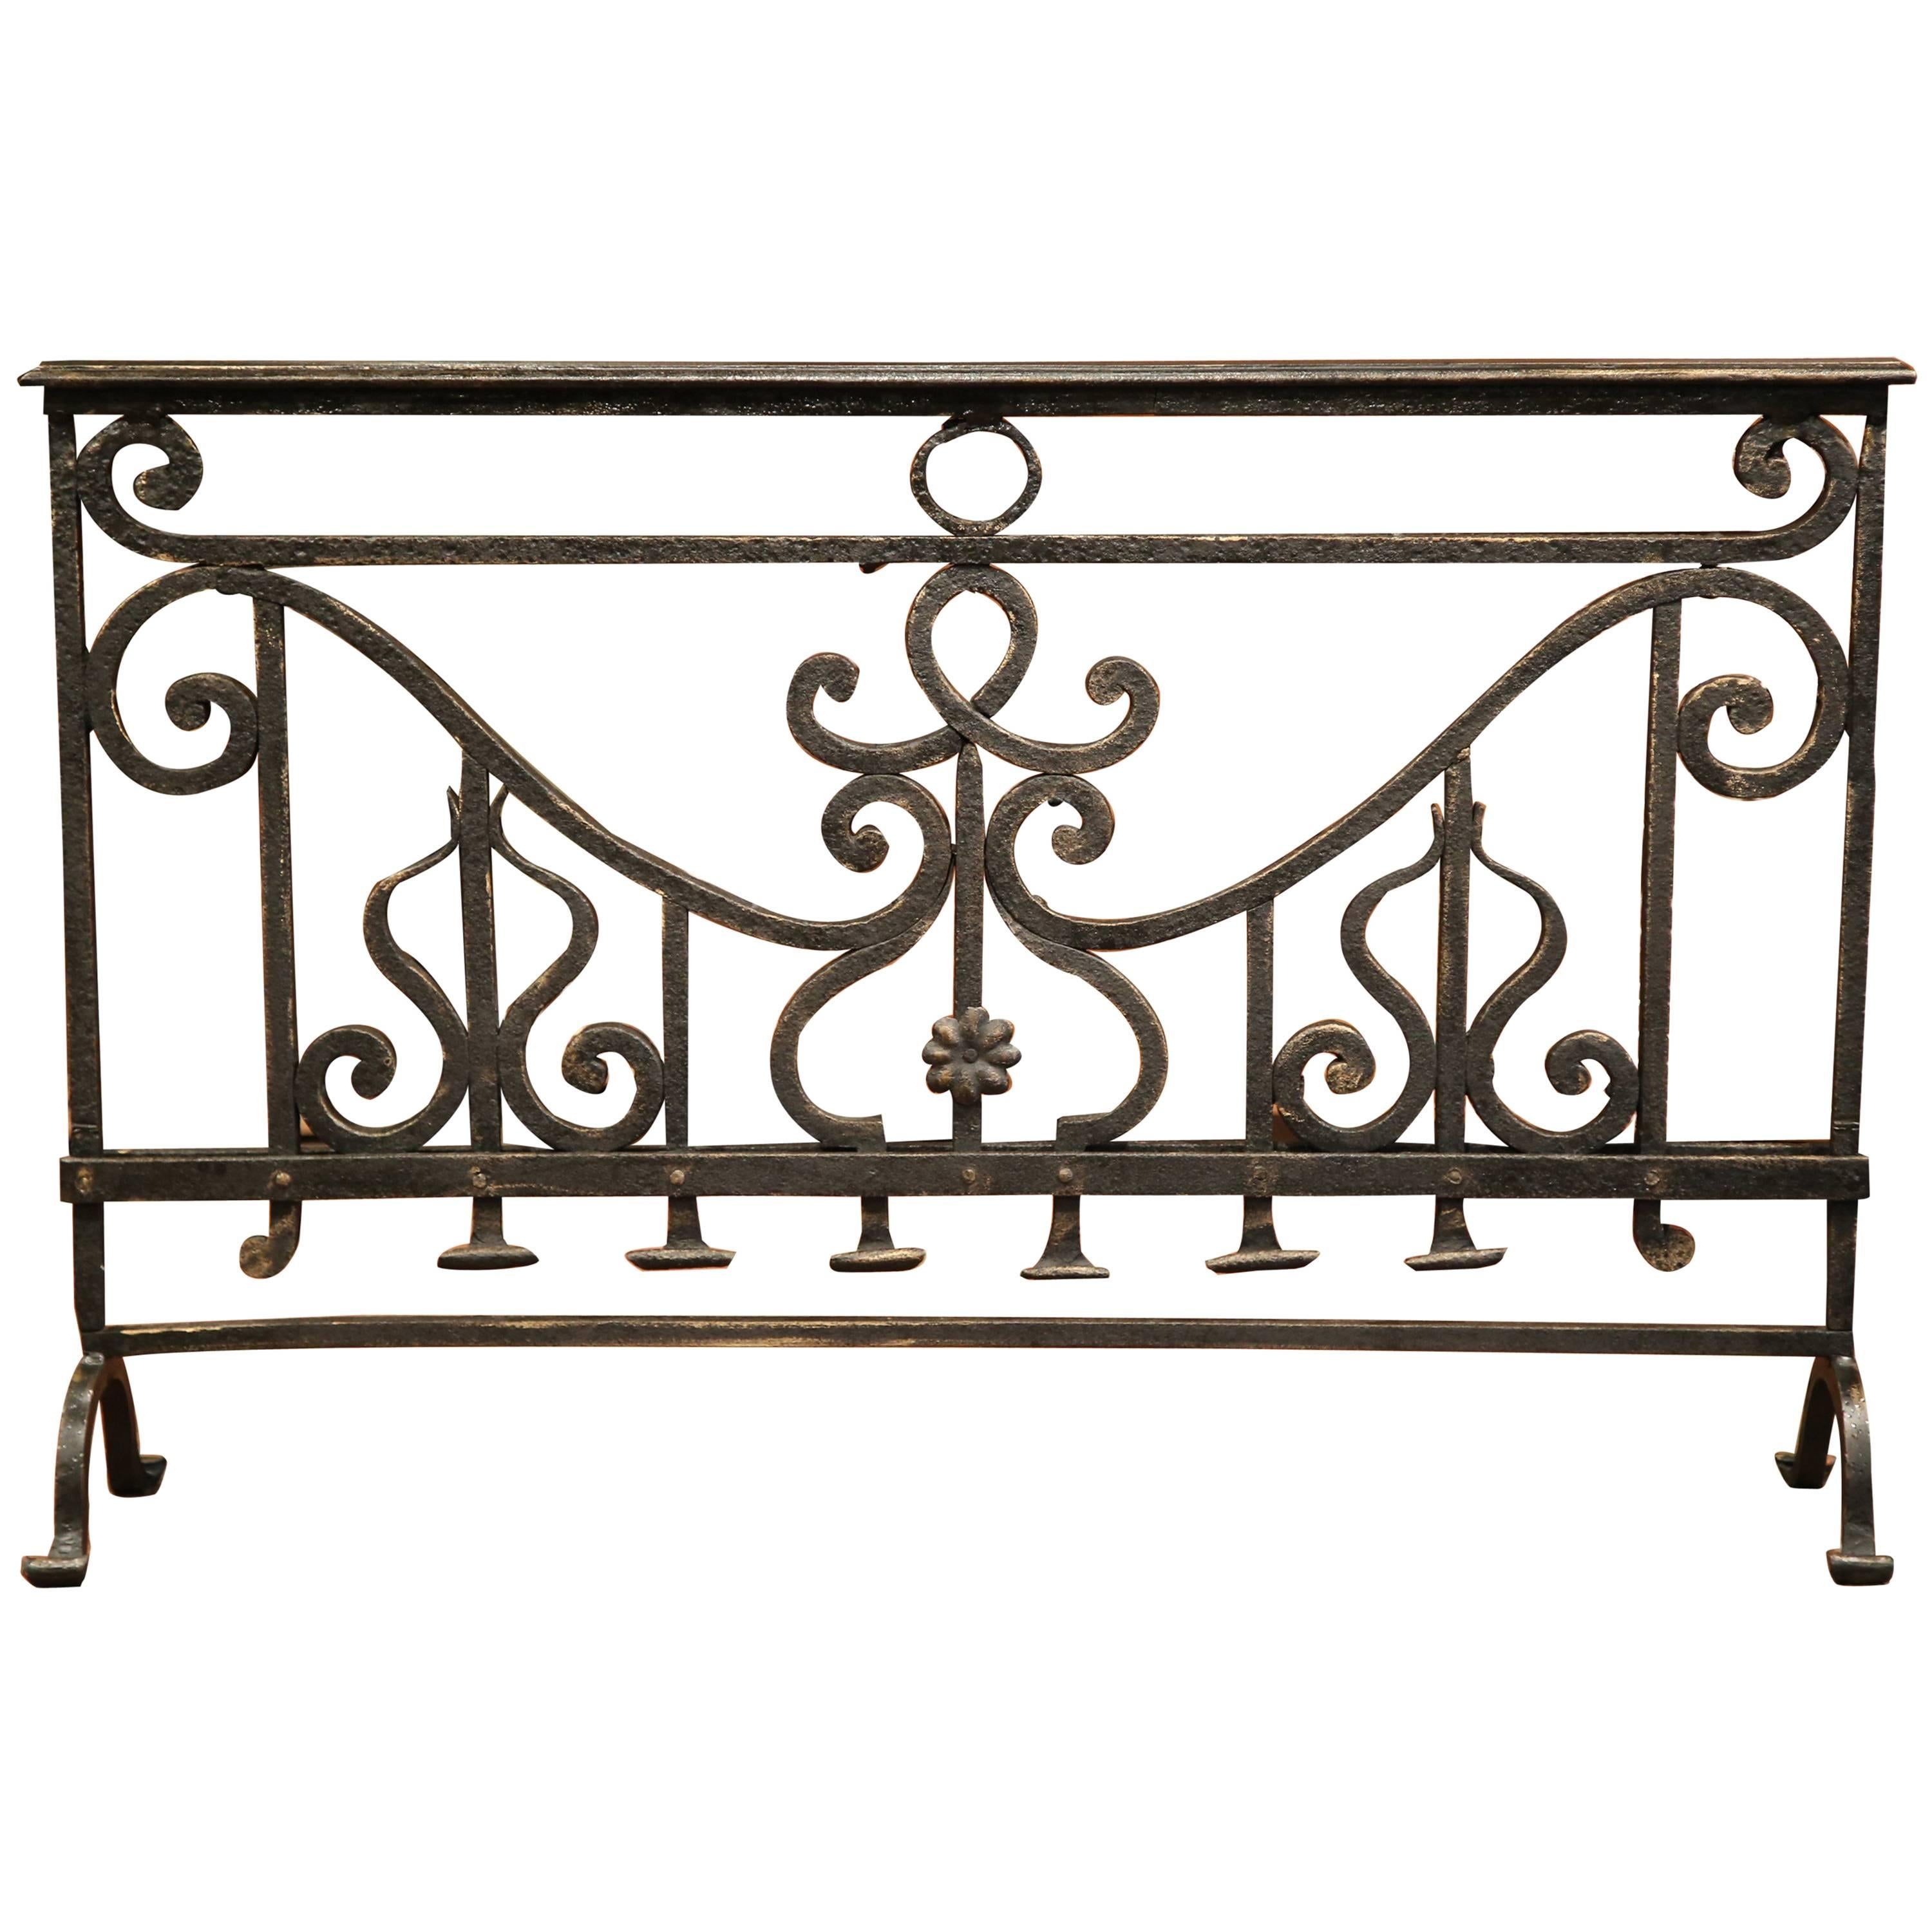 18th Century French Patinated Wrought Iron Fireplace Screen